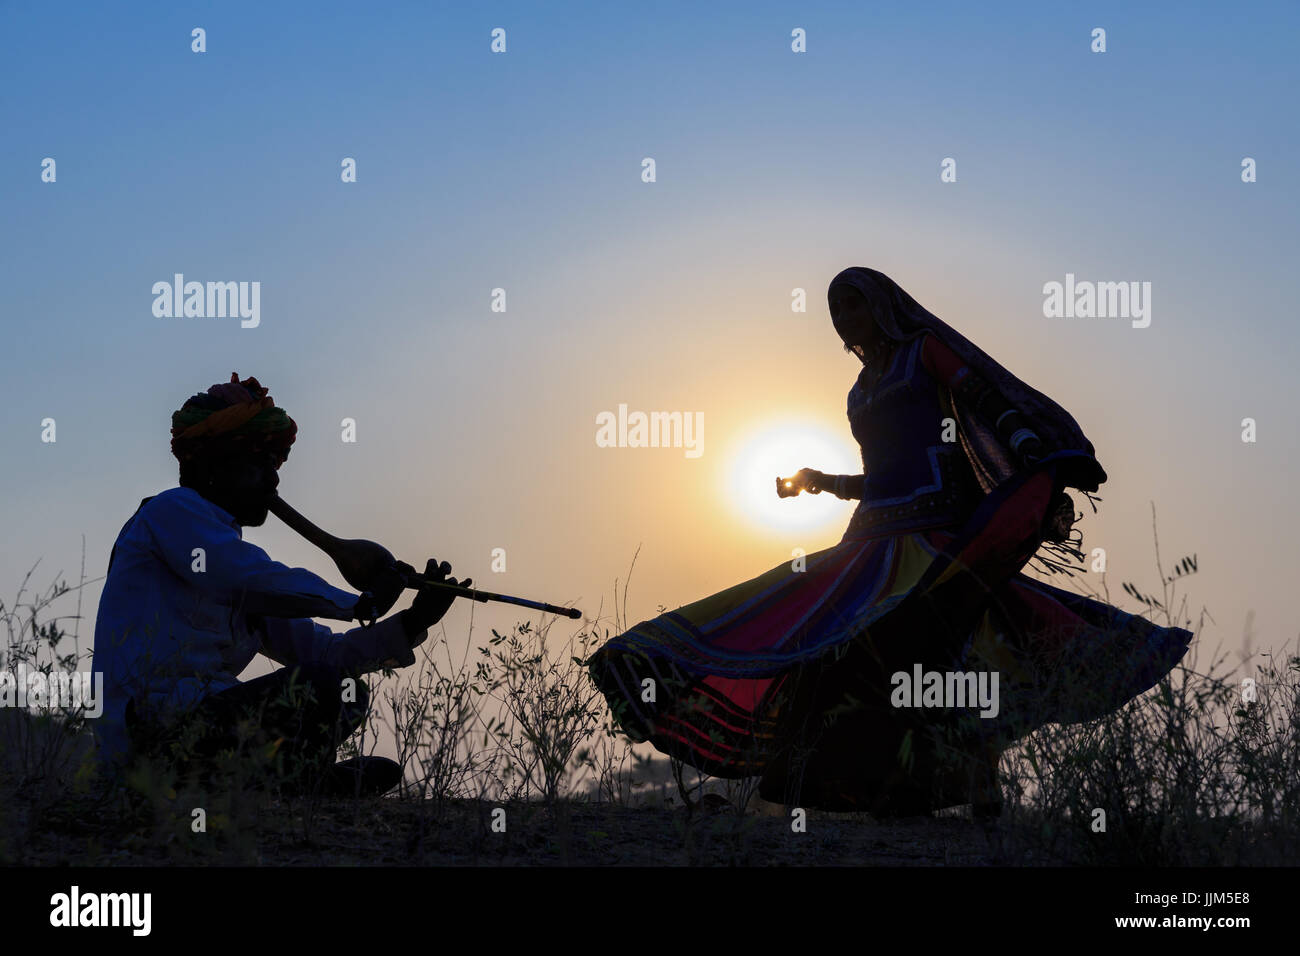 Silhouette of a gypsy woman dancing a traditional dance to the music of a musician, Pushkar, Rajasthan, India Stock Photo